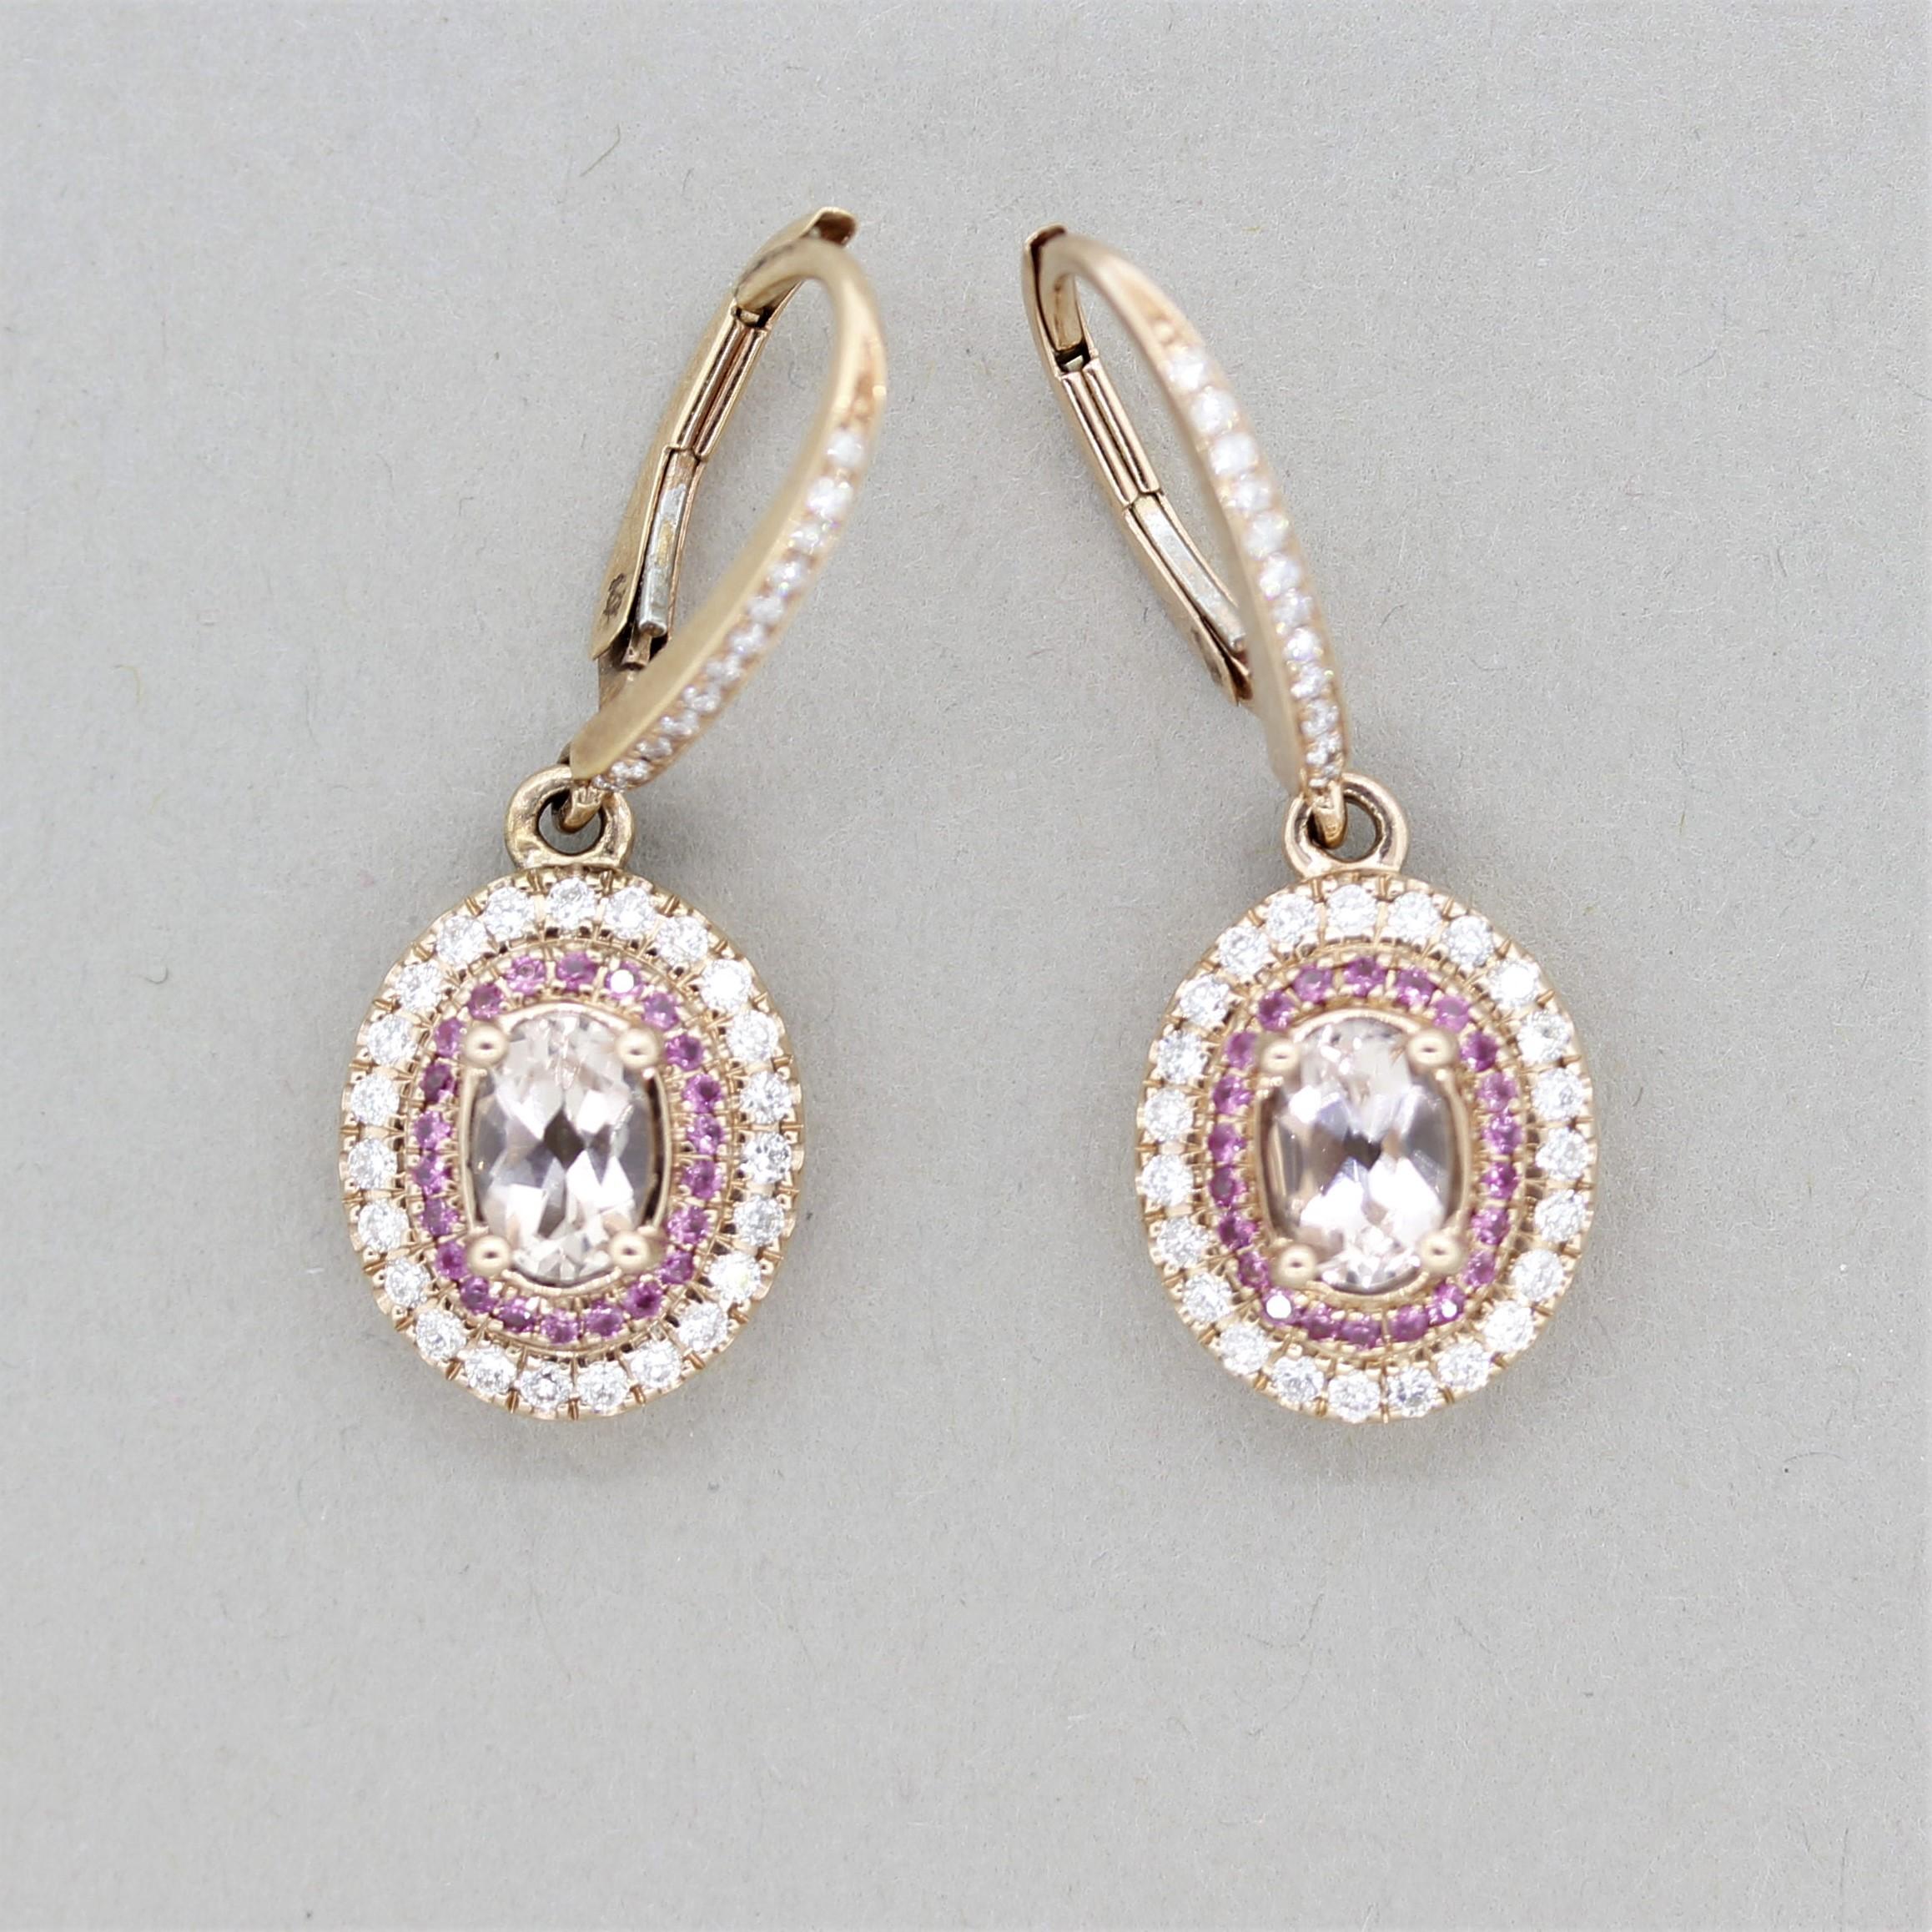 A cute and stylish pair of earrings featuring oval-shaped morganites weighing 1.00 carat. They are accented by halos of diamonds, 0.60 carats, and pink sapphires, 0.25 carats, which adds a unique style to the drops. Made in 14k rose gold.

Length: